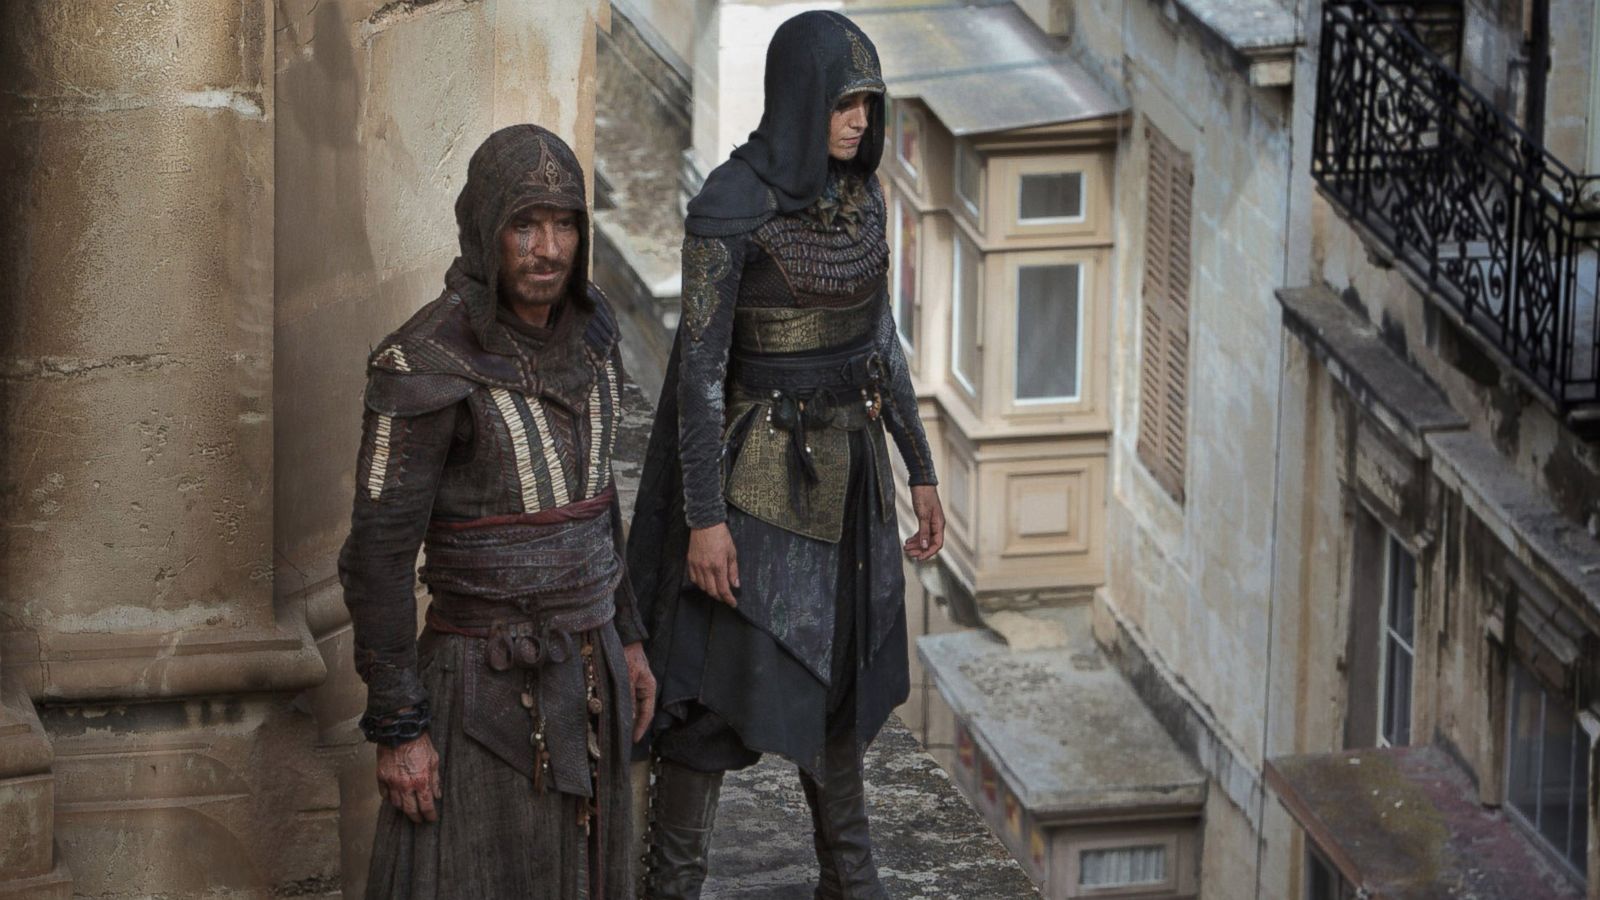 Review: 'Assassin's Creed' Is the Worst Movie Michael Fassbender Has Done -  ABC News